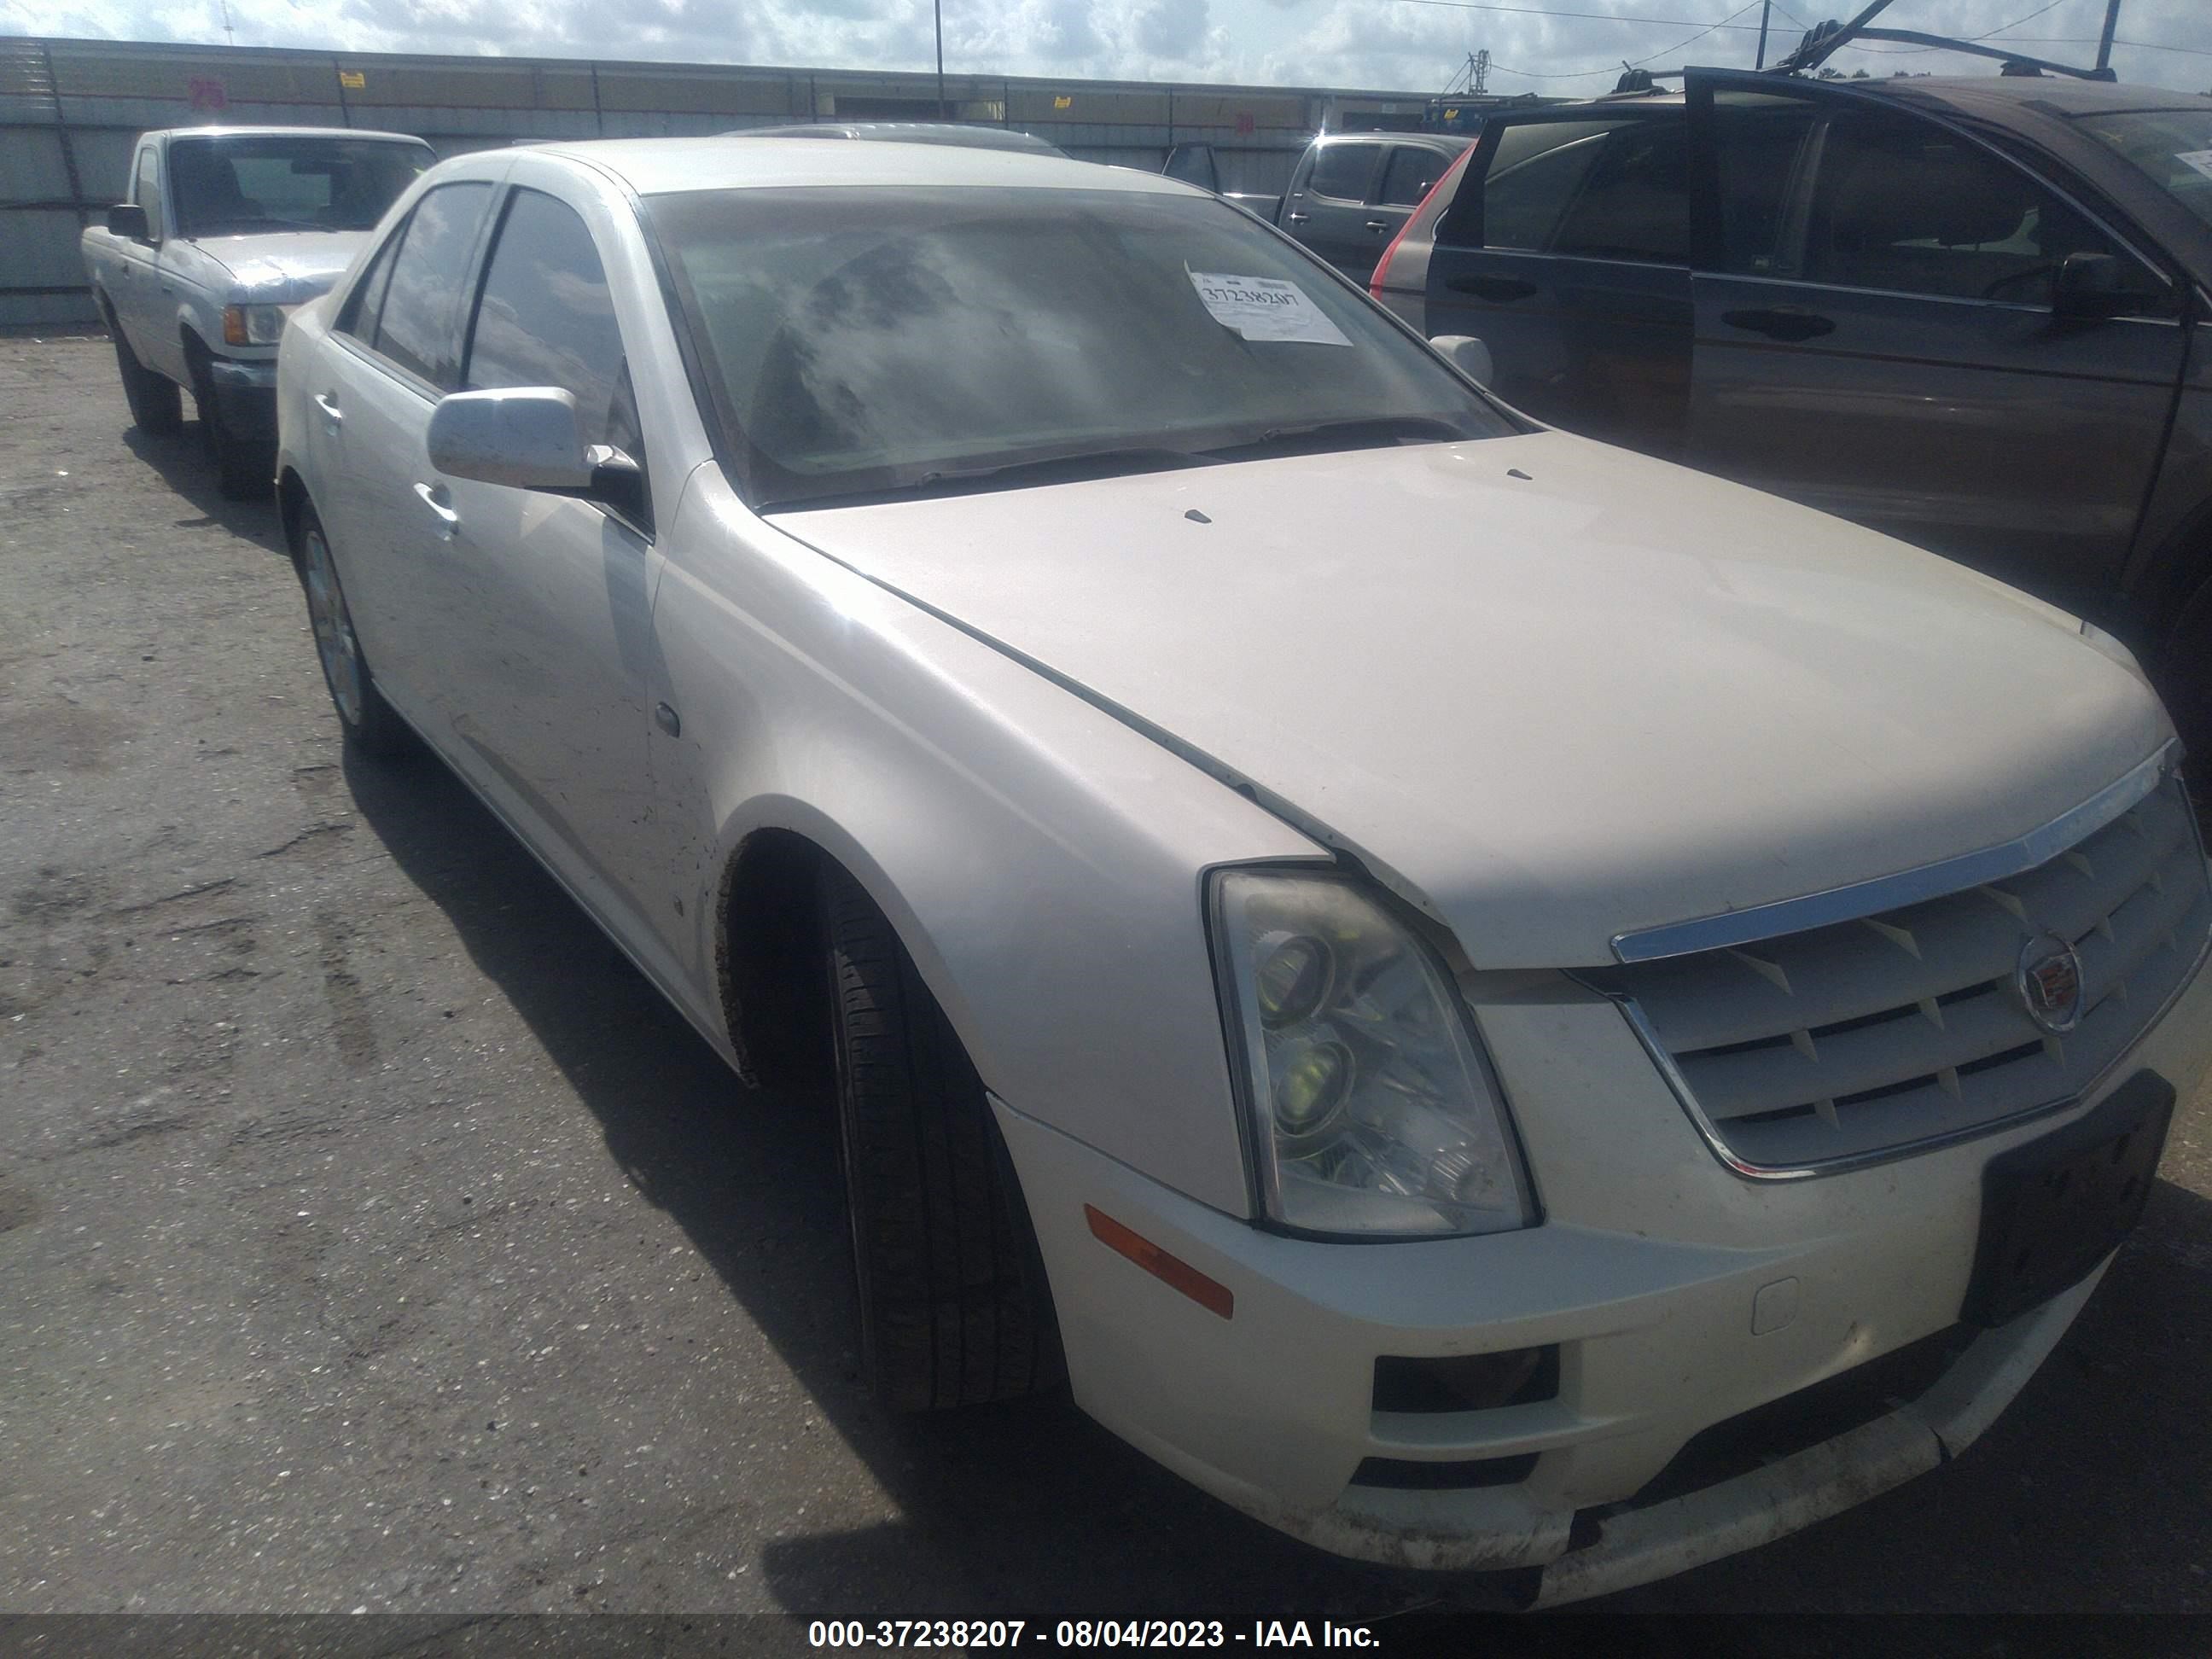 VIN: 1G6DC67A460139814 - cadillac sts